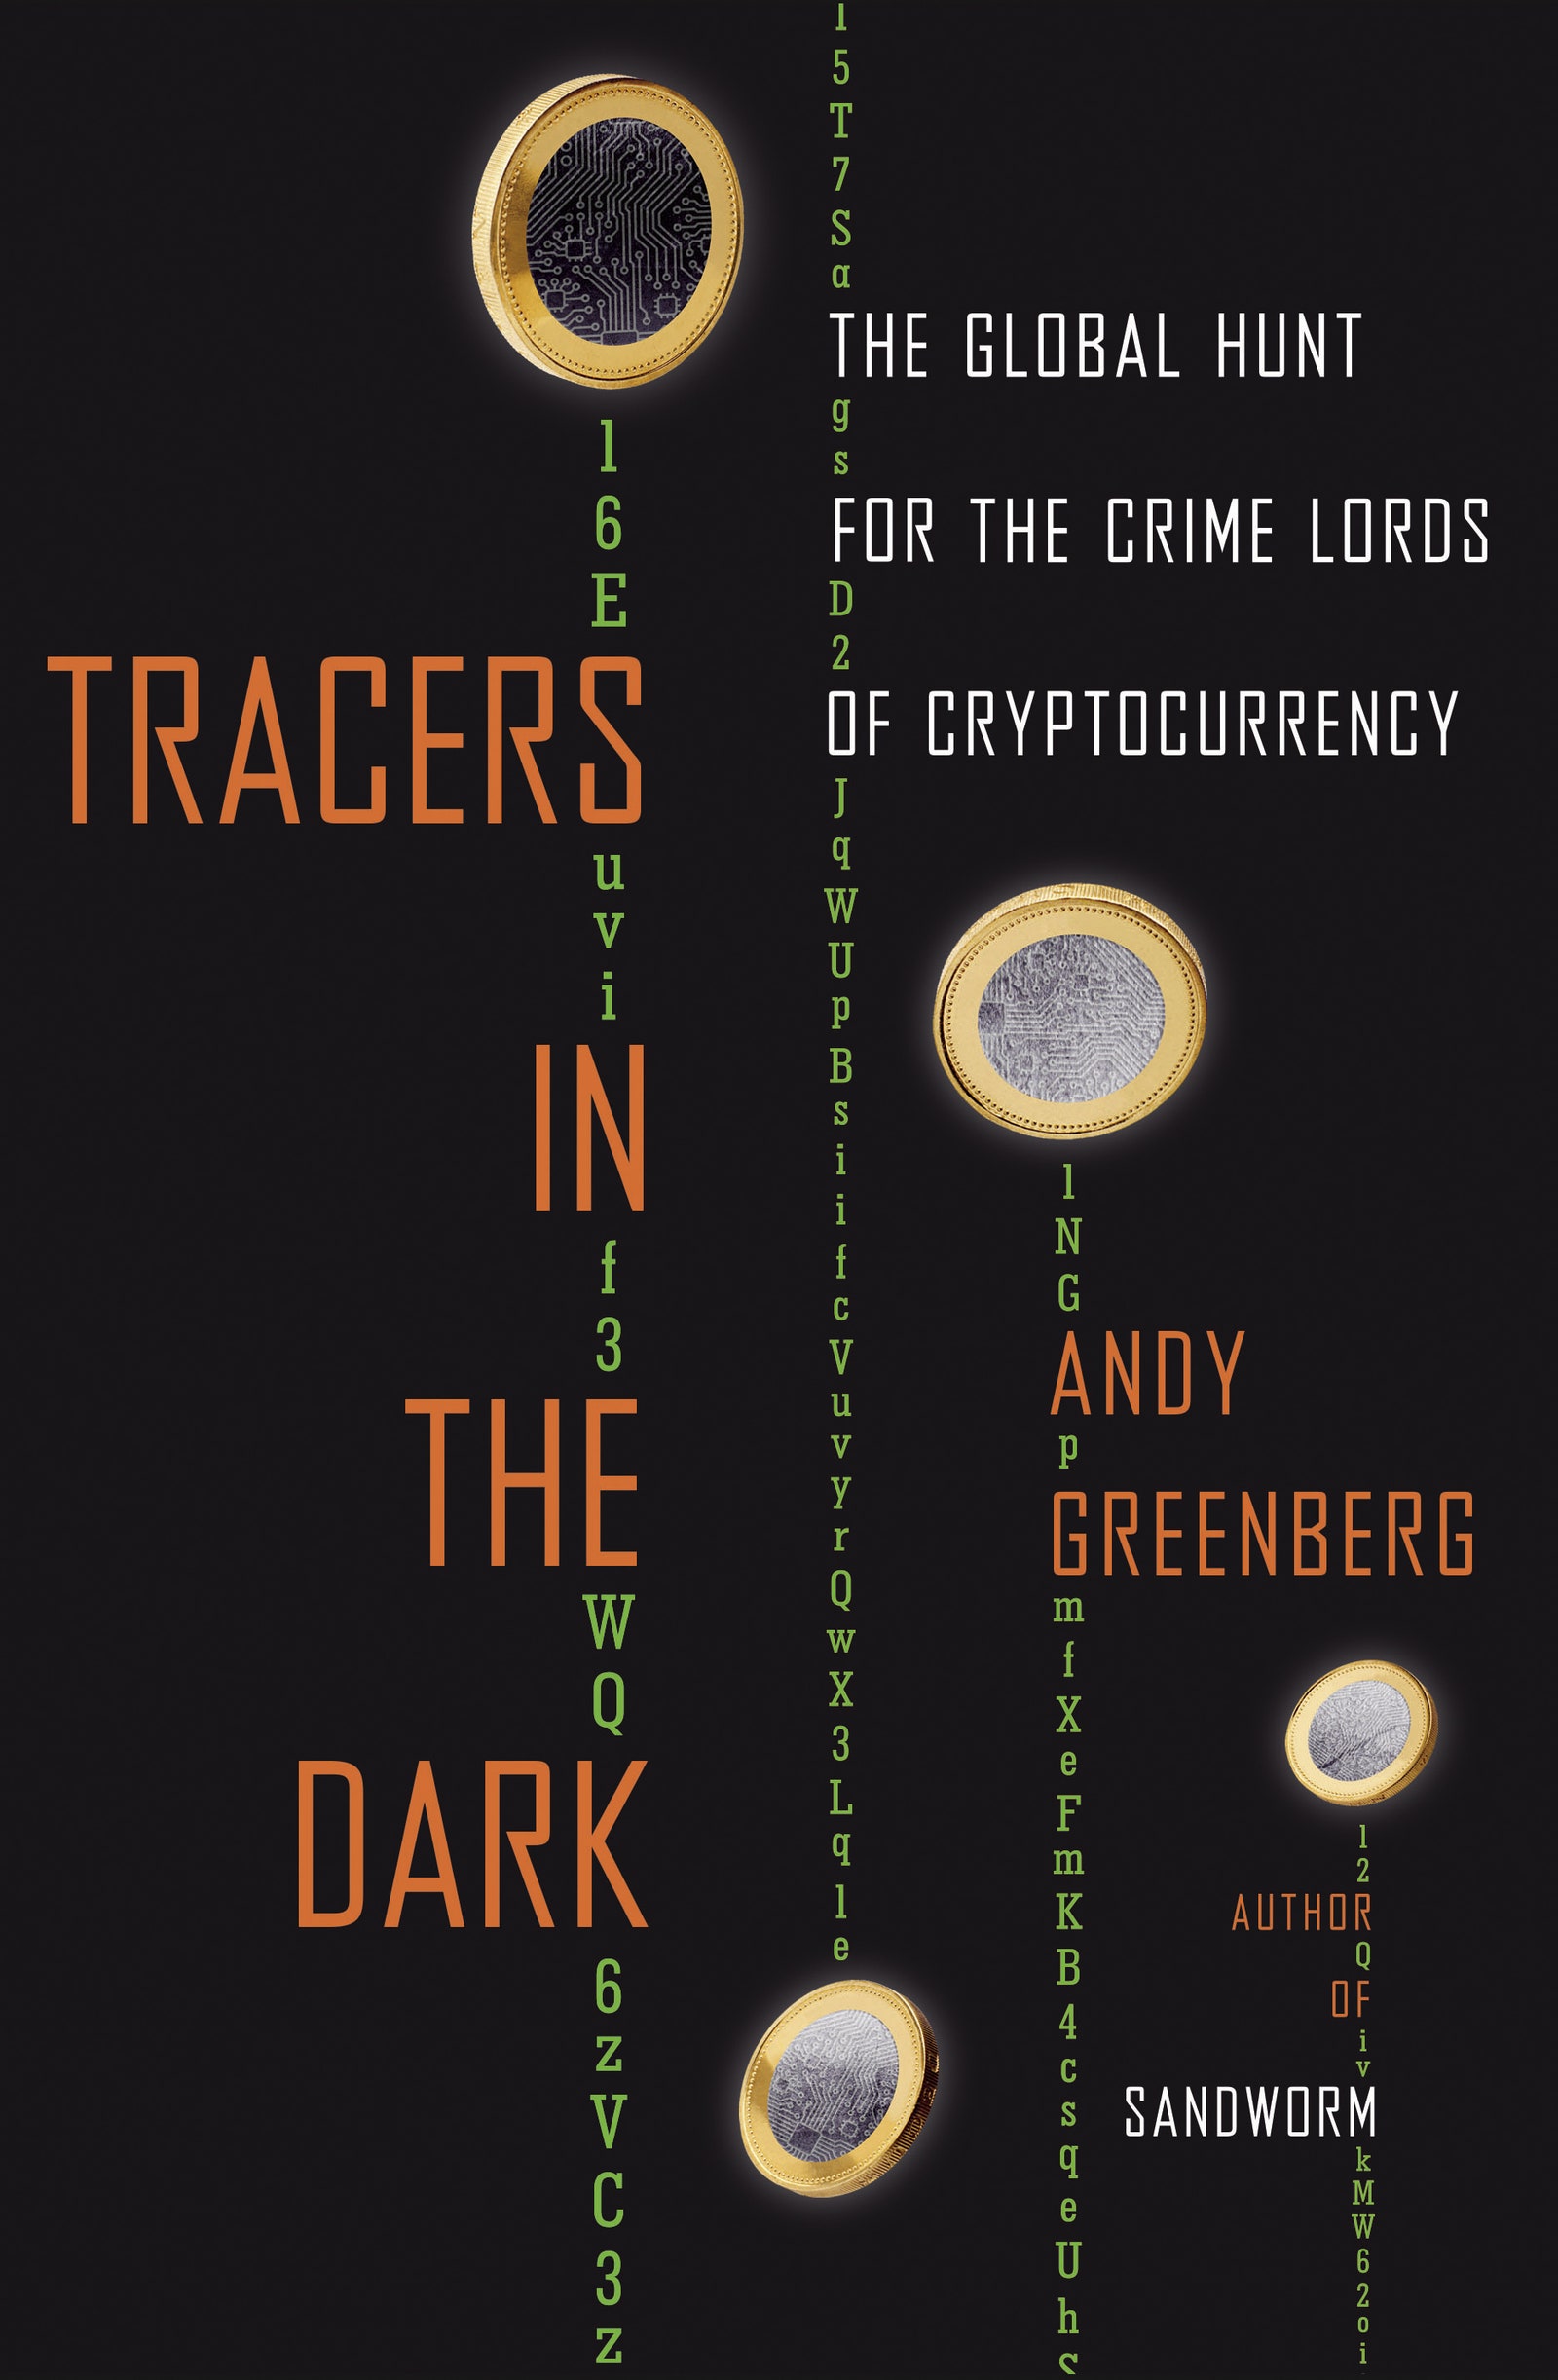 Tracers in the Dark book cover